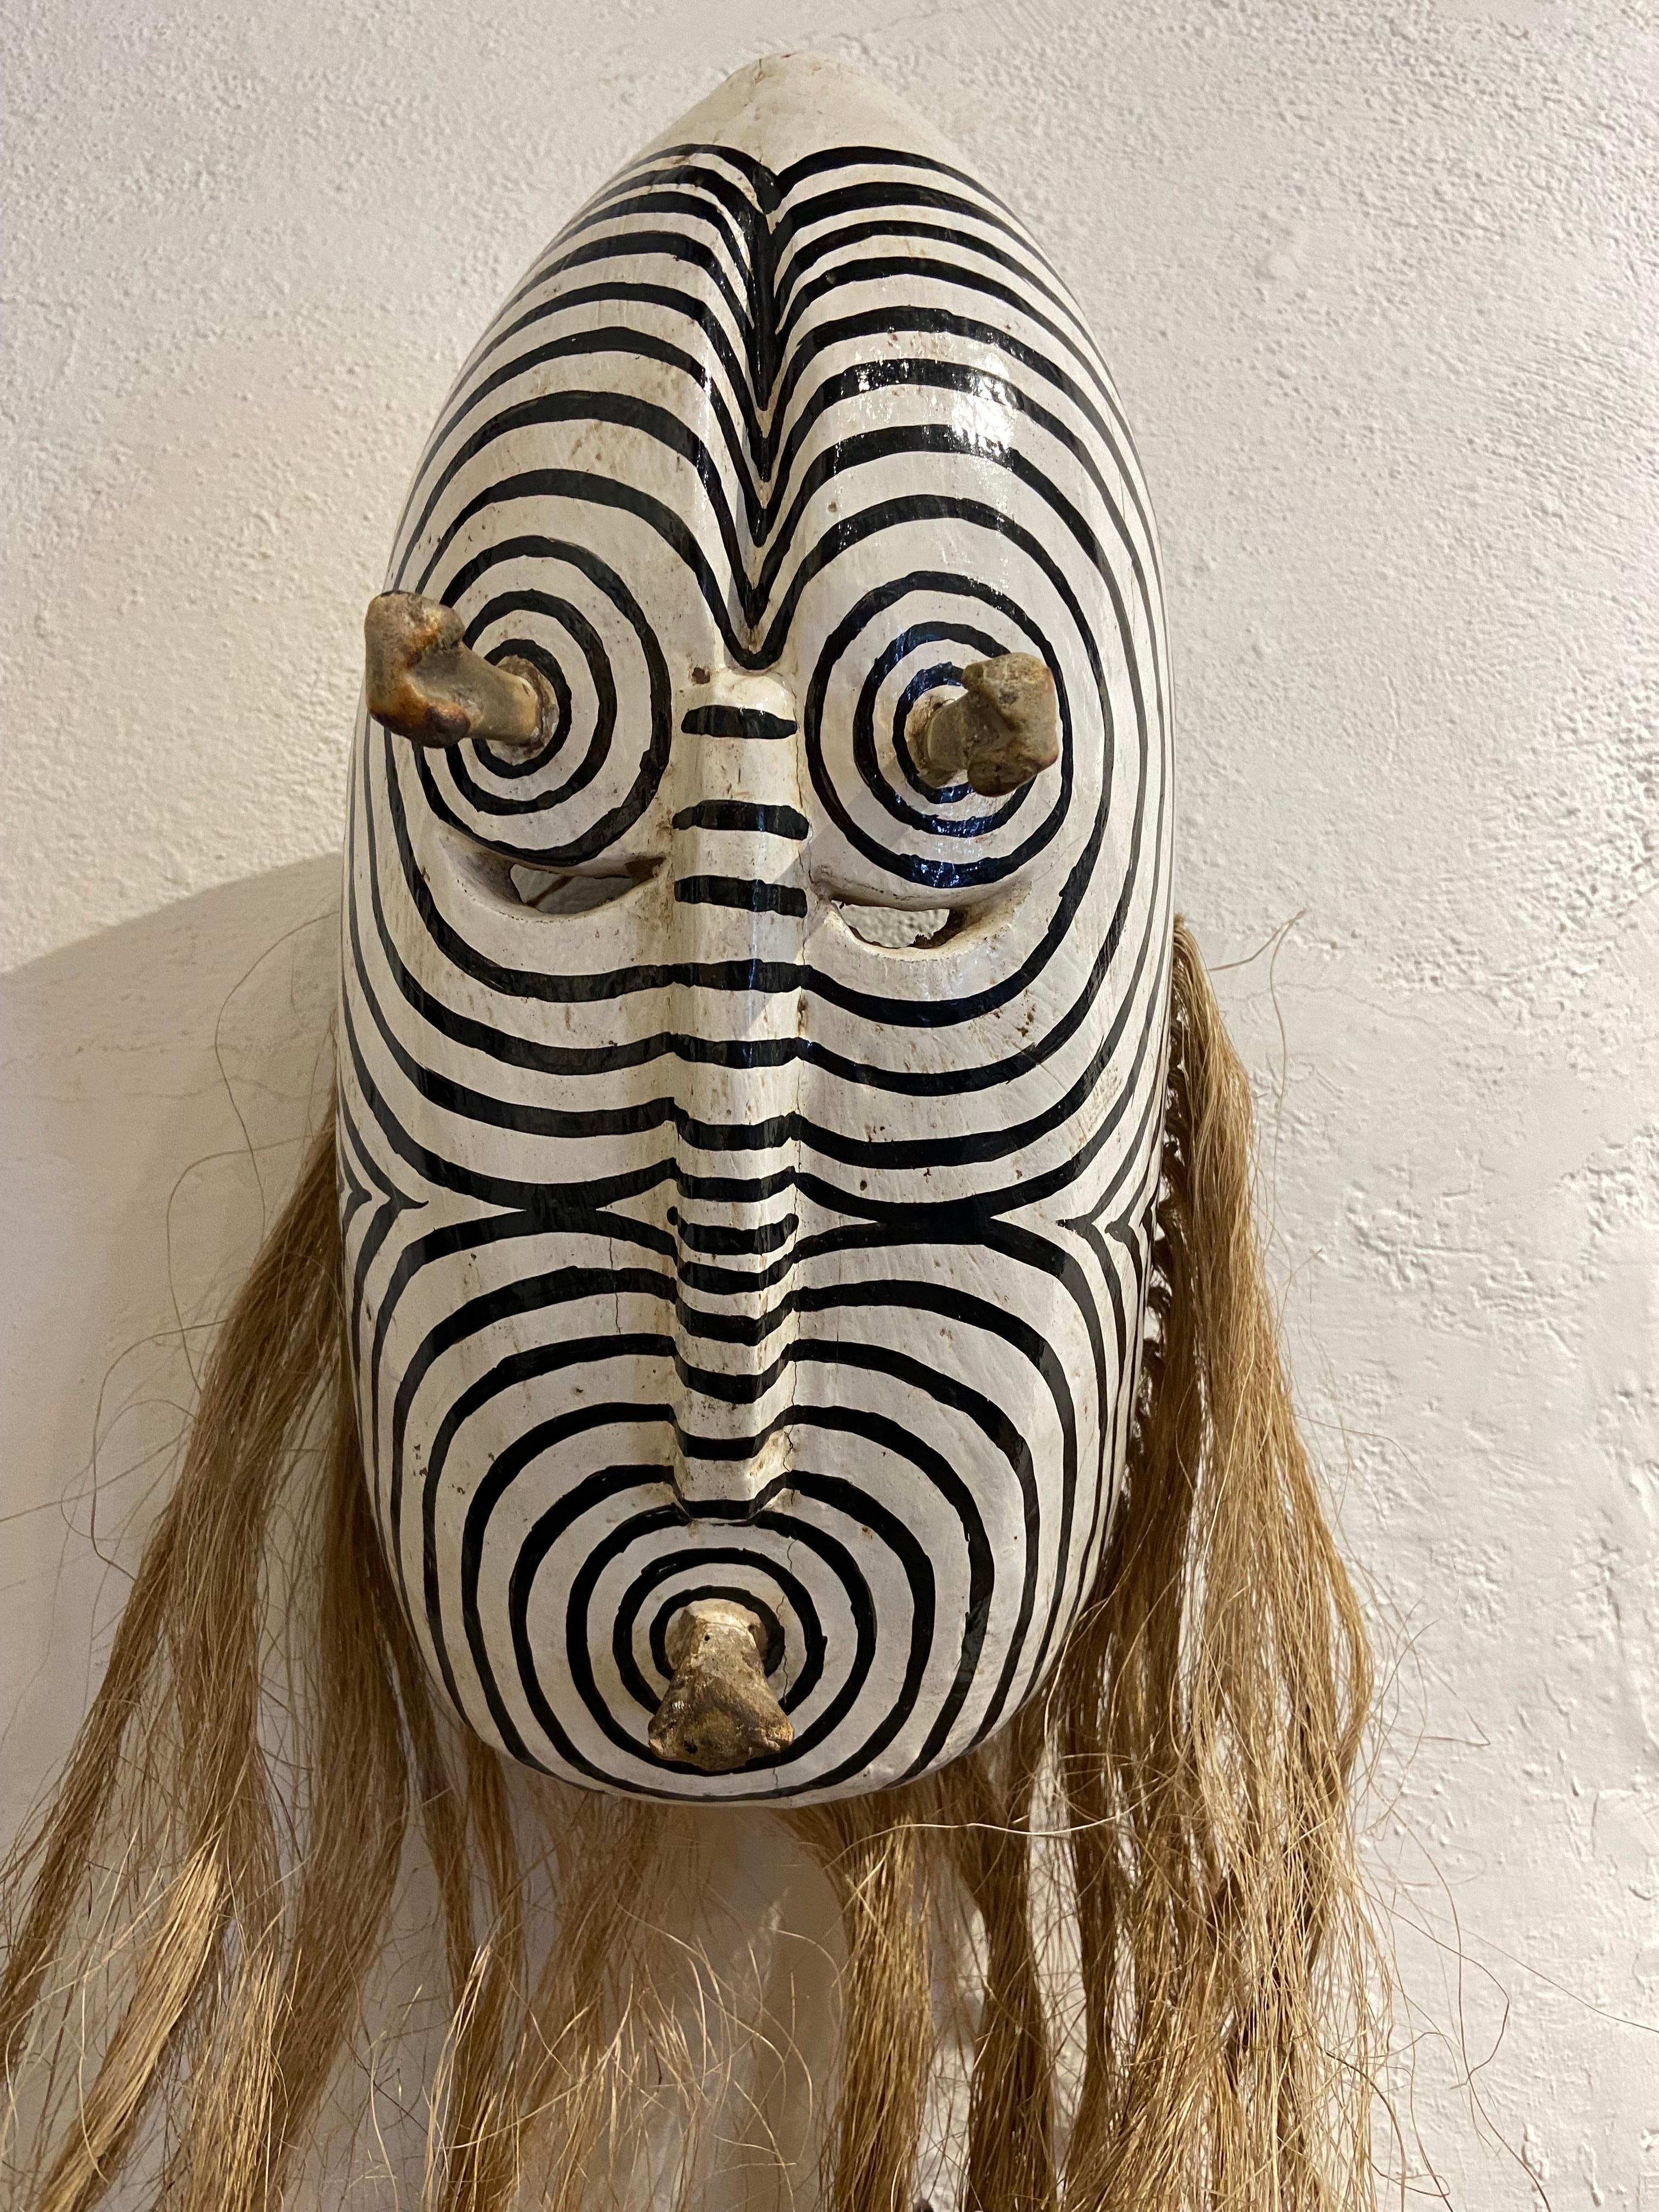 Contemporary wooden mask from the Seri people of Sonora, Mexico. The mane is made from natural agave ixtle fiber.